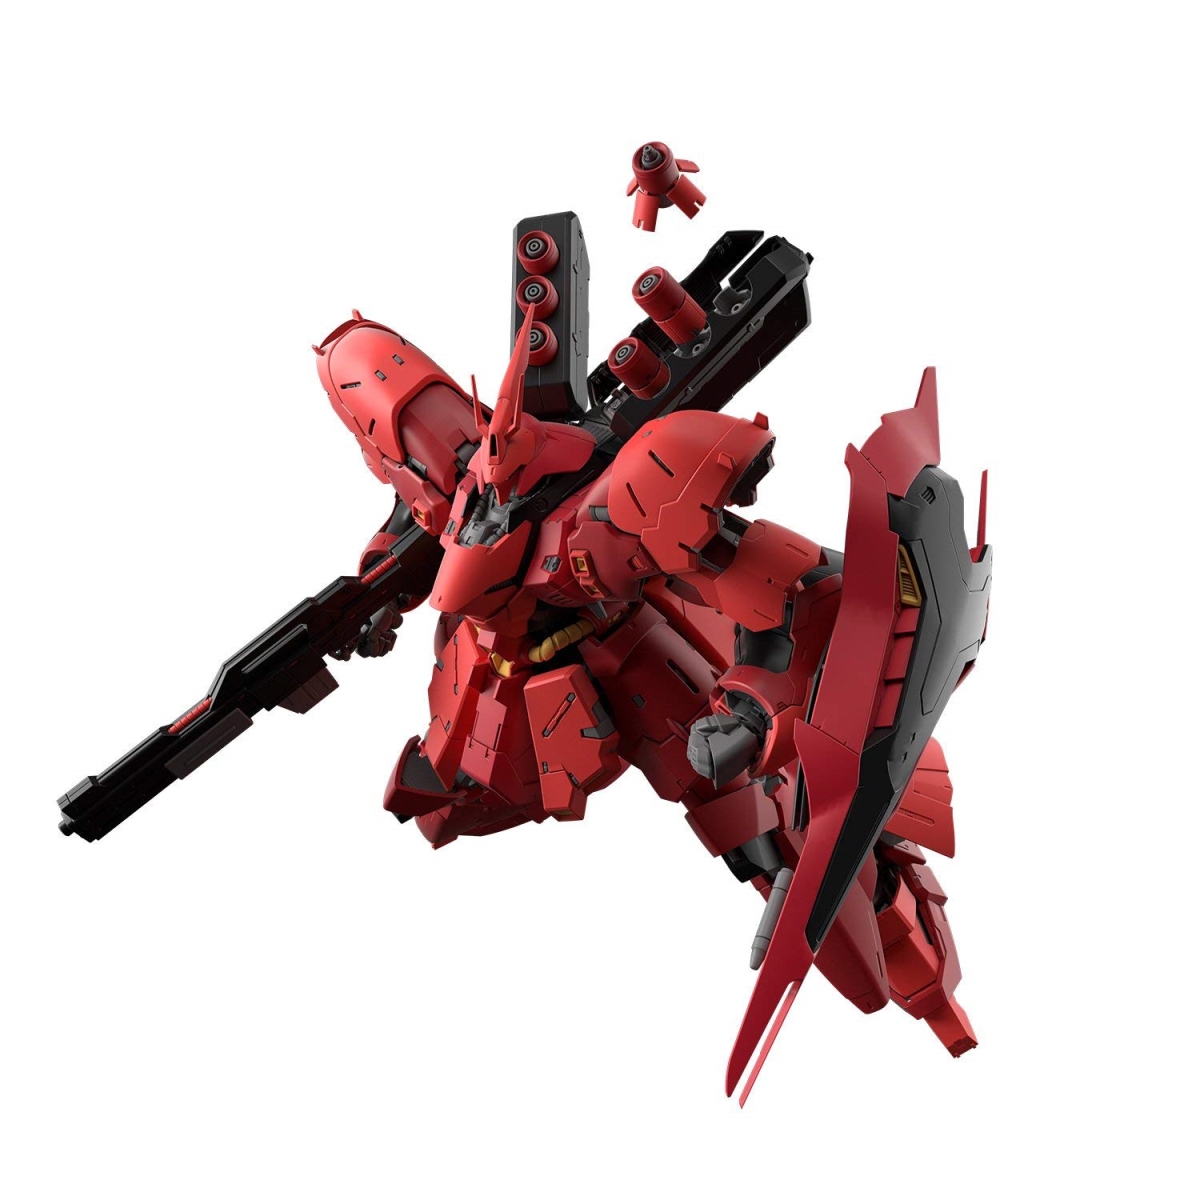 Ban230363 1 By 144 Scale No.29 Sazabi Rg Model Kit From Chars Counterattack